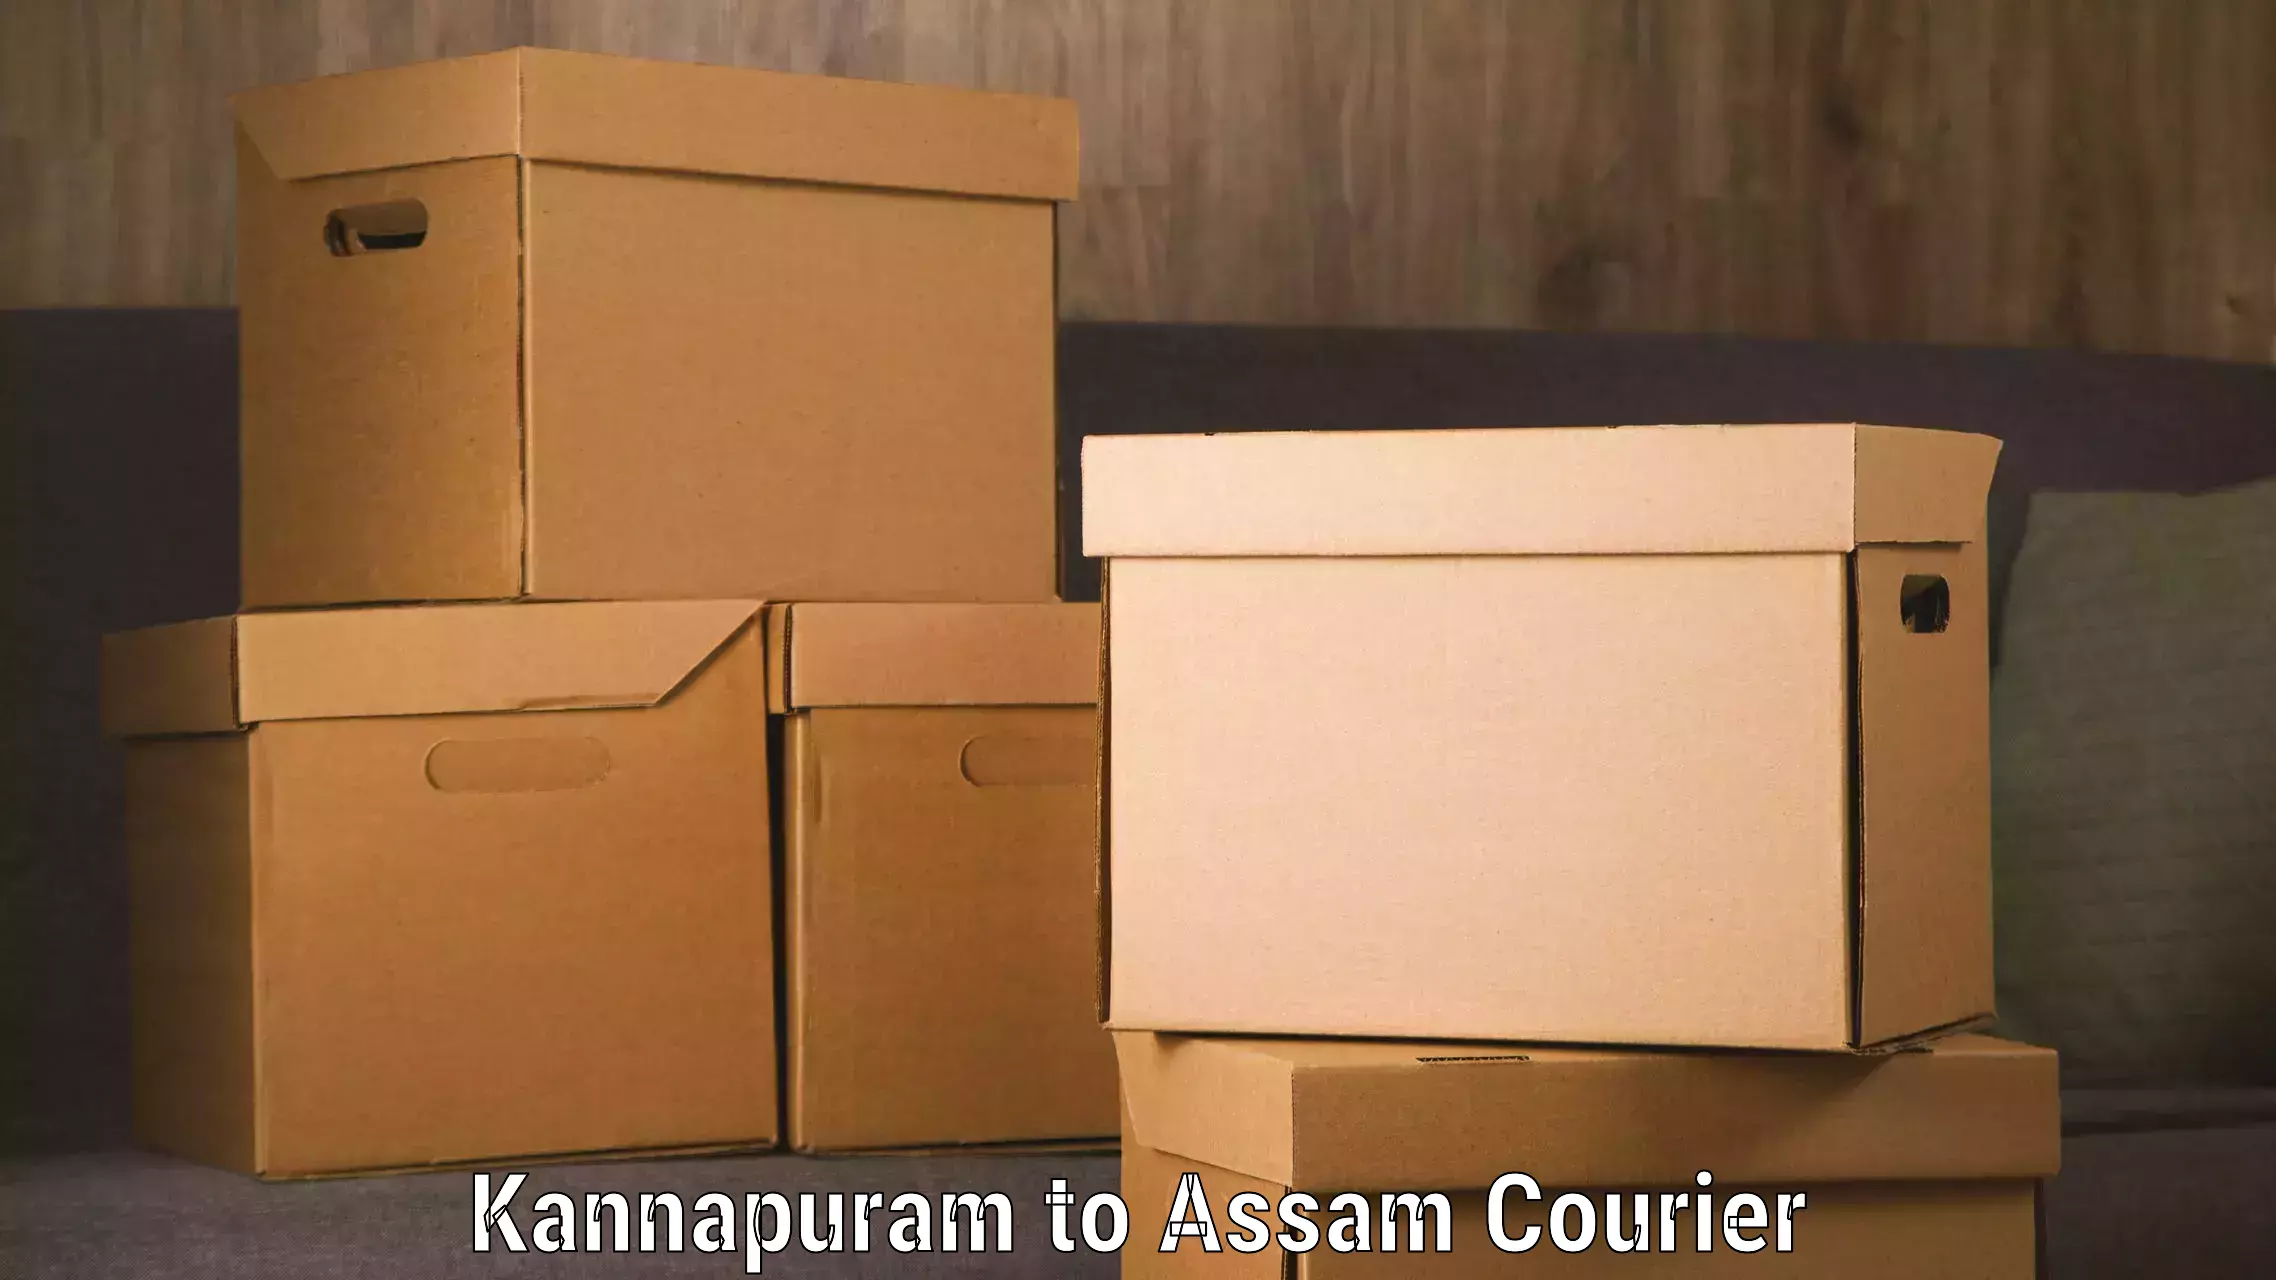 Same-day delivery solutions Kannapuram to Assam